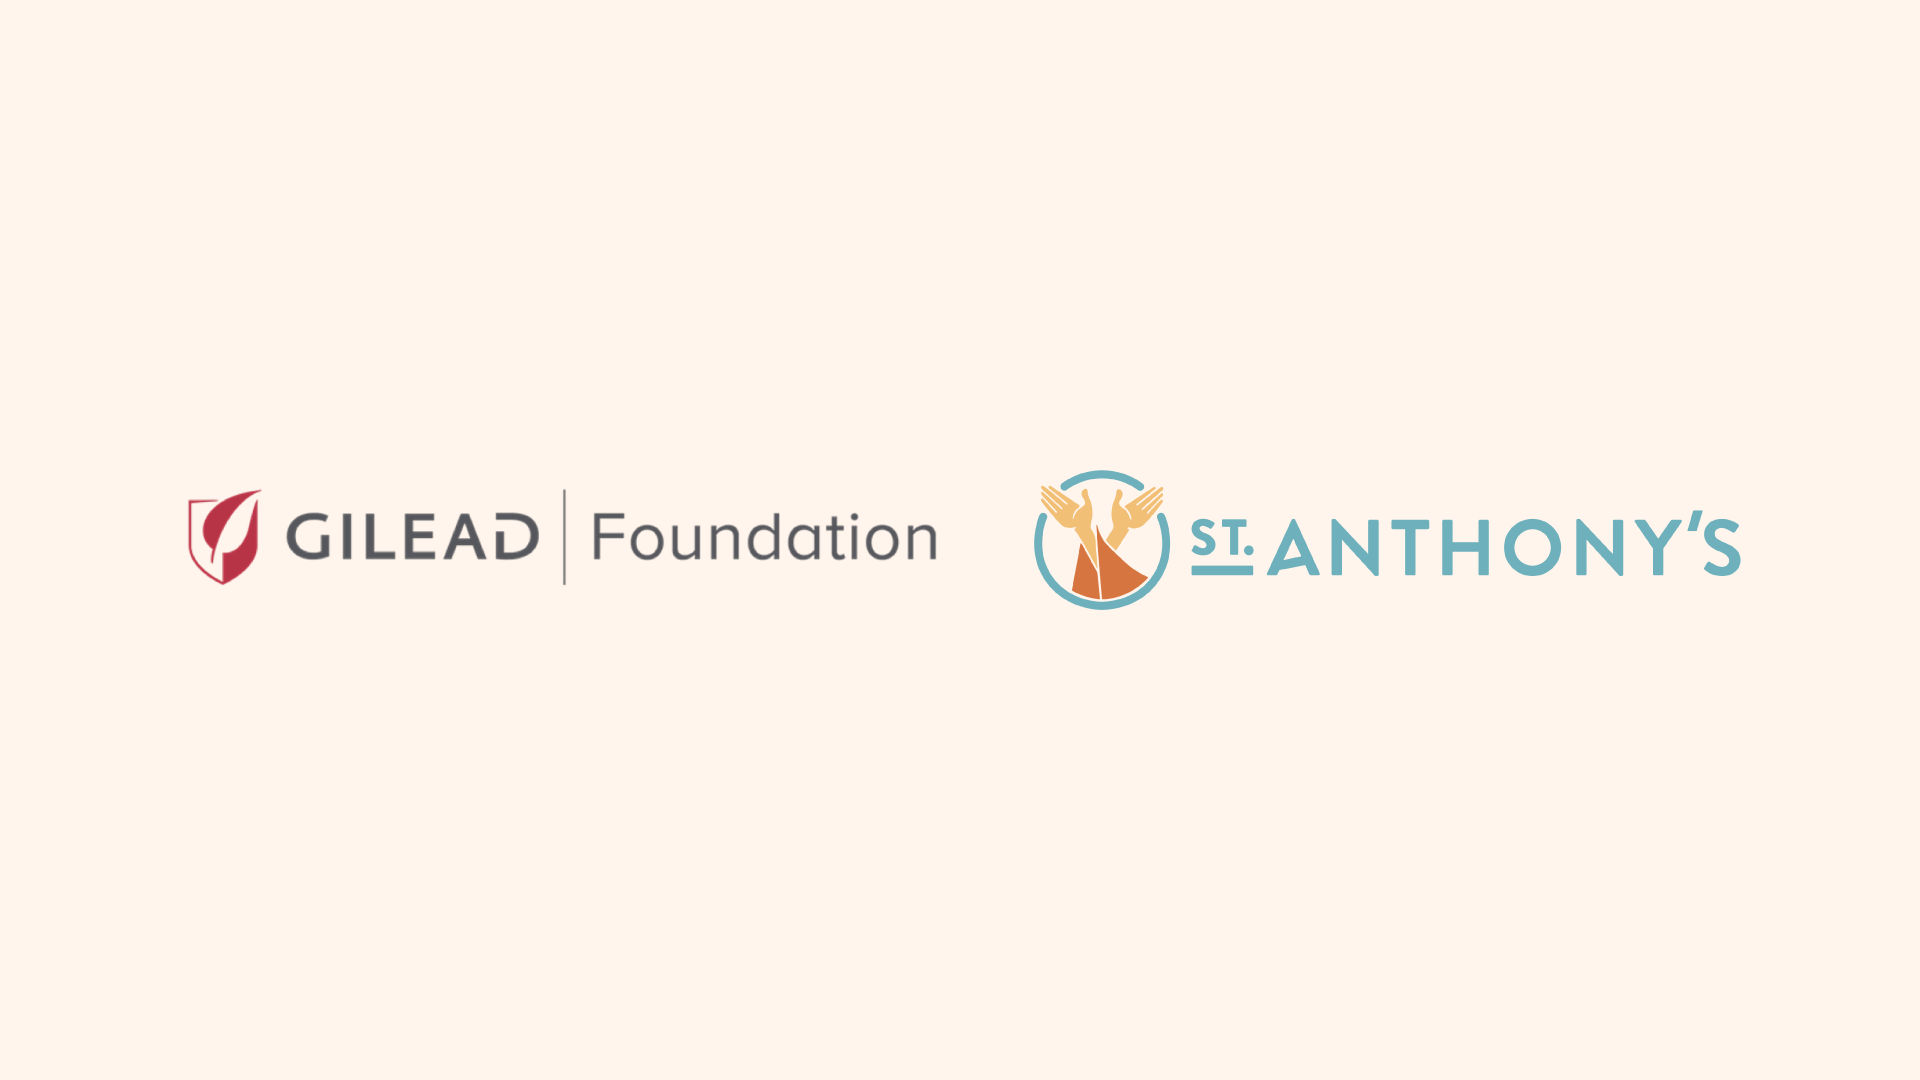 St. Anthony Foundation Receives $250,000 Grant from Gilead Foundation